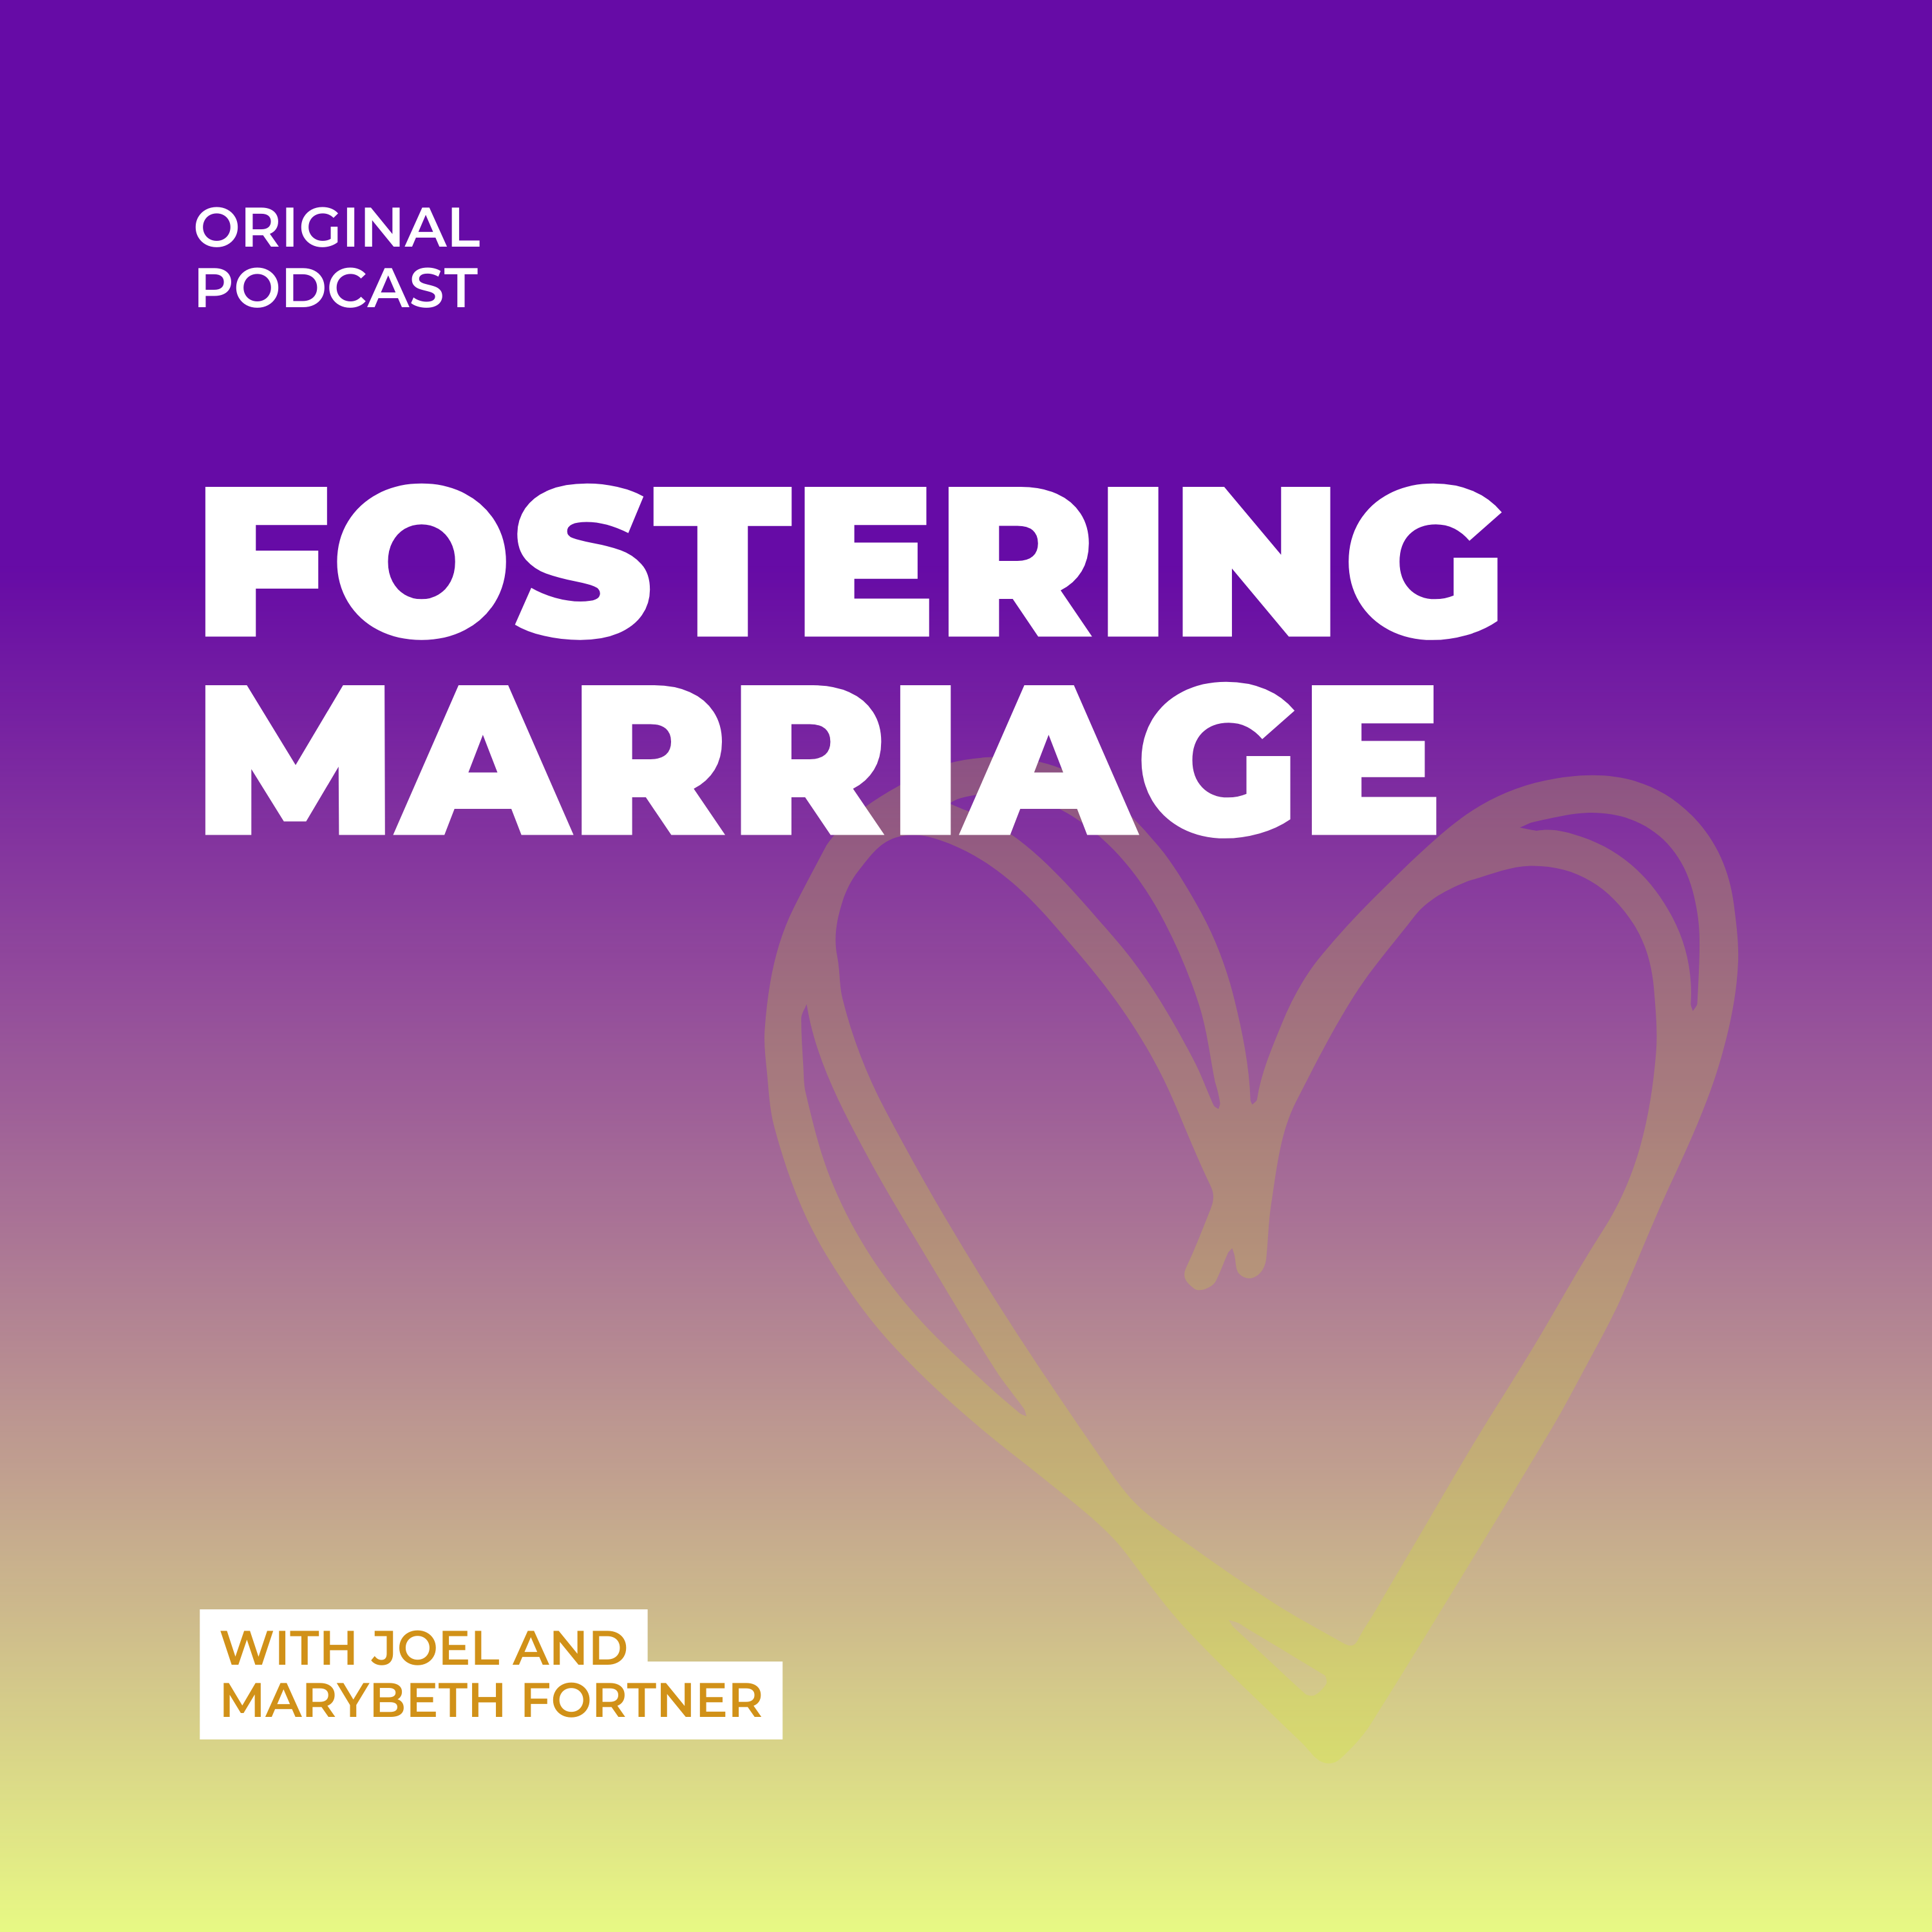 Artwork for podcast Fostering Marriage